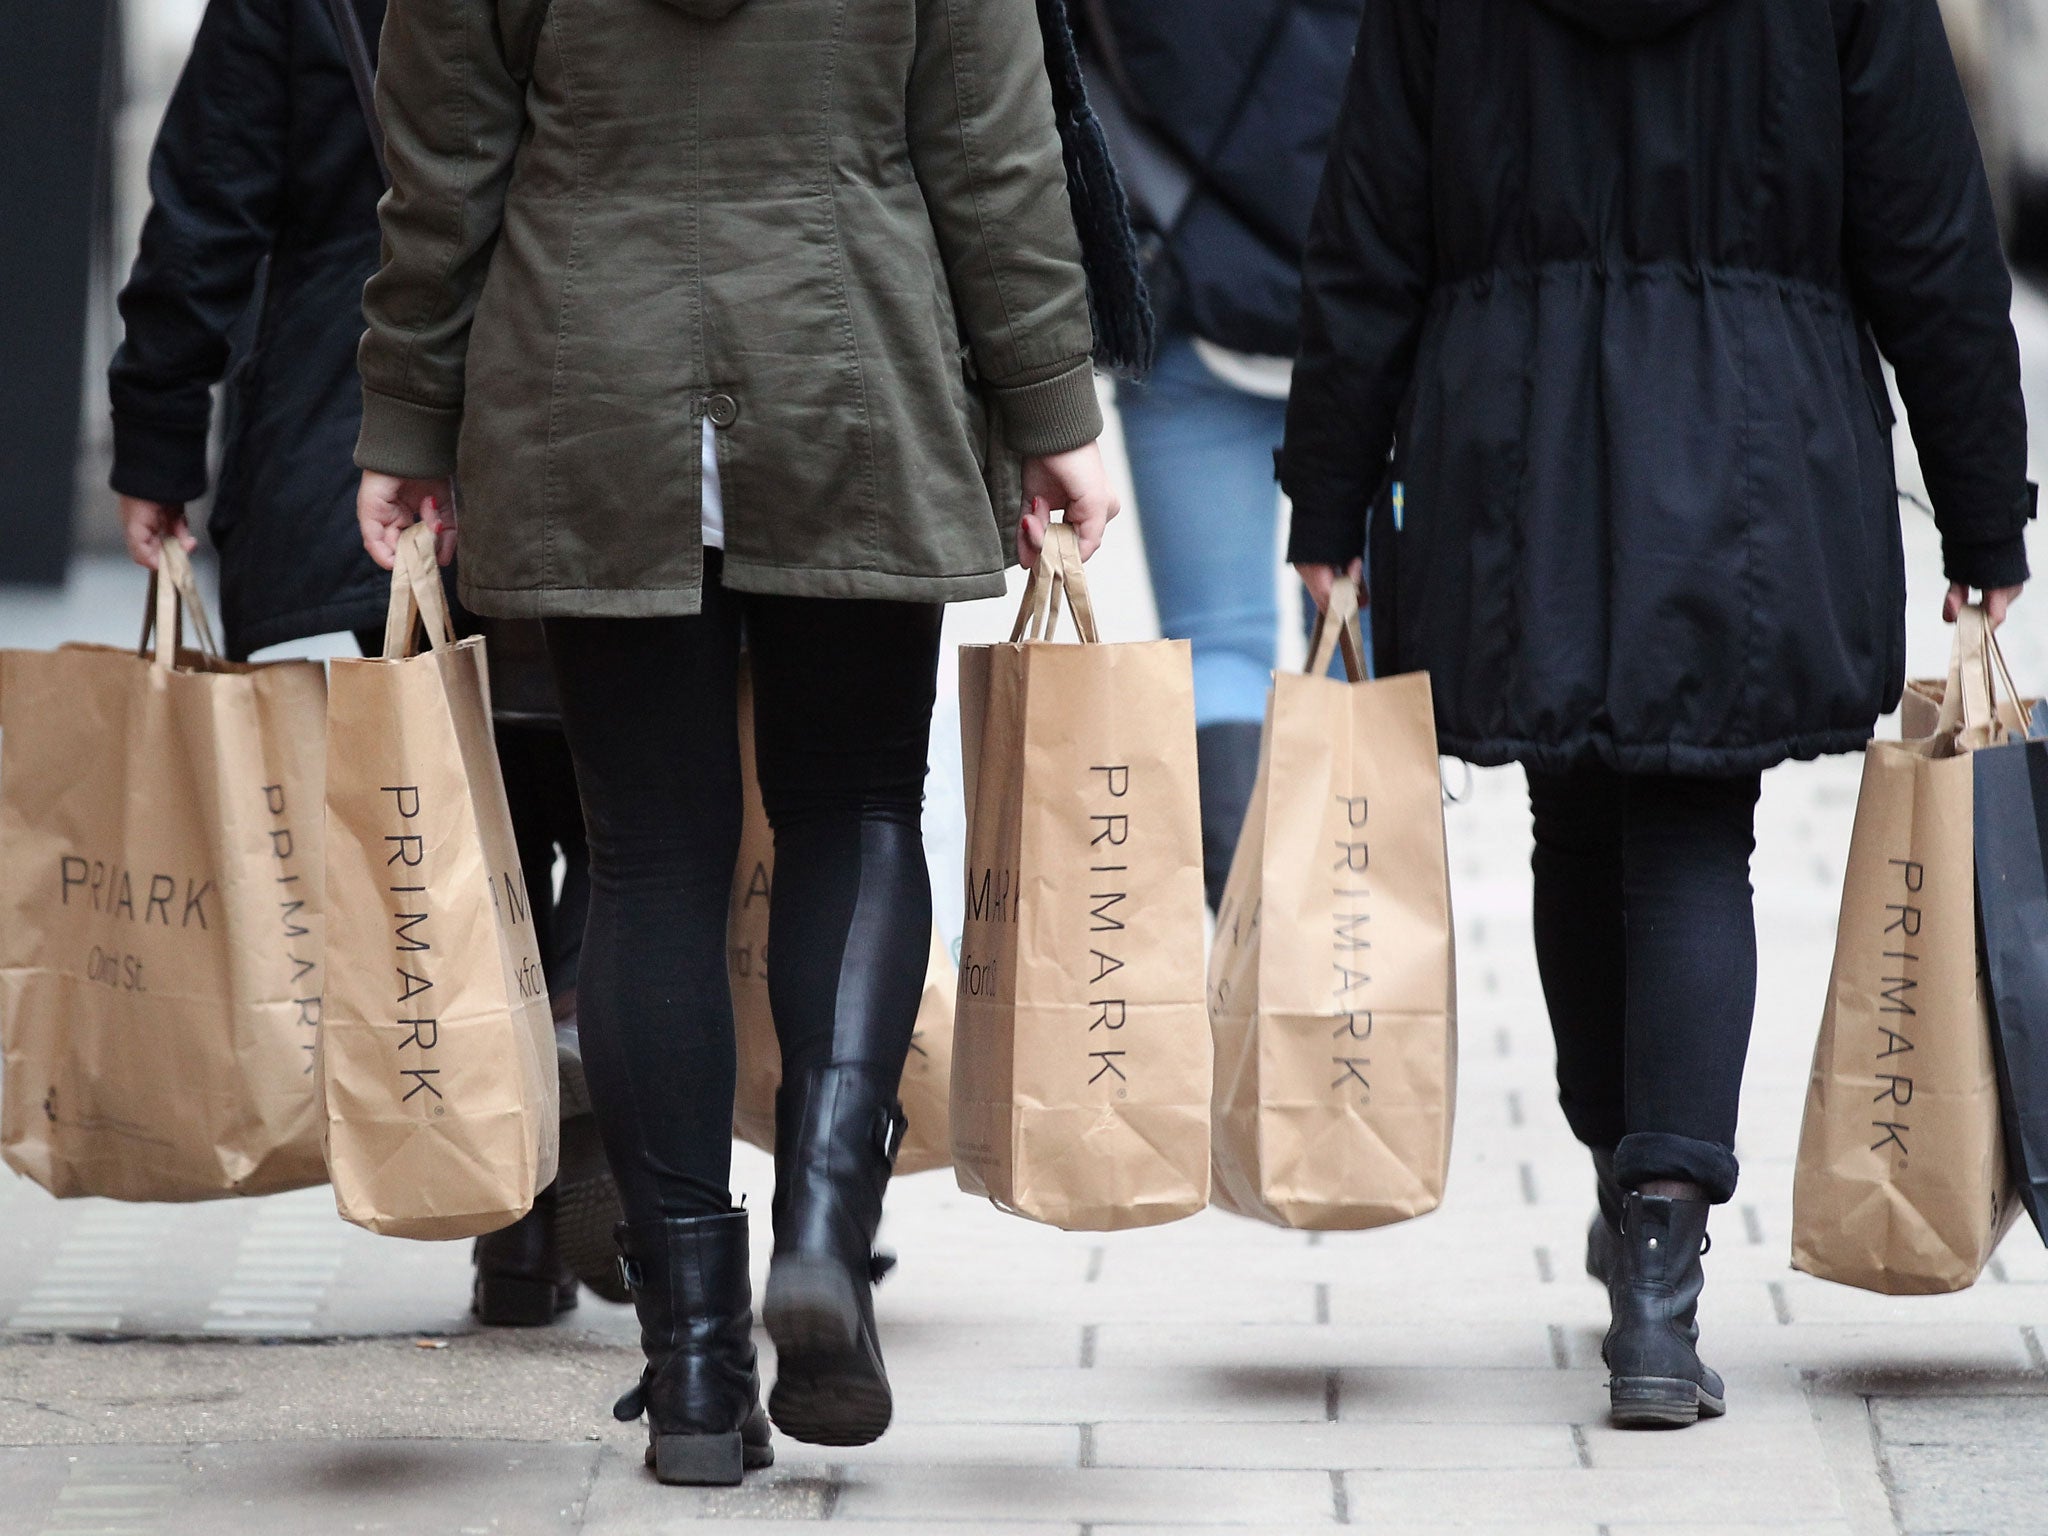 Like other retailers discount clothing chain Primark had to slash the costs of some of its winter items in the unseasonably warm autumn